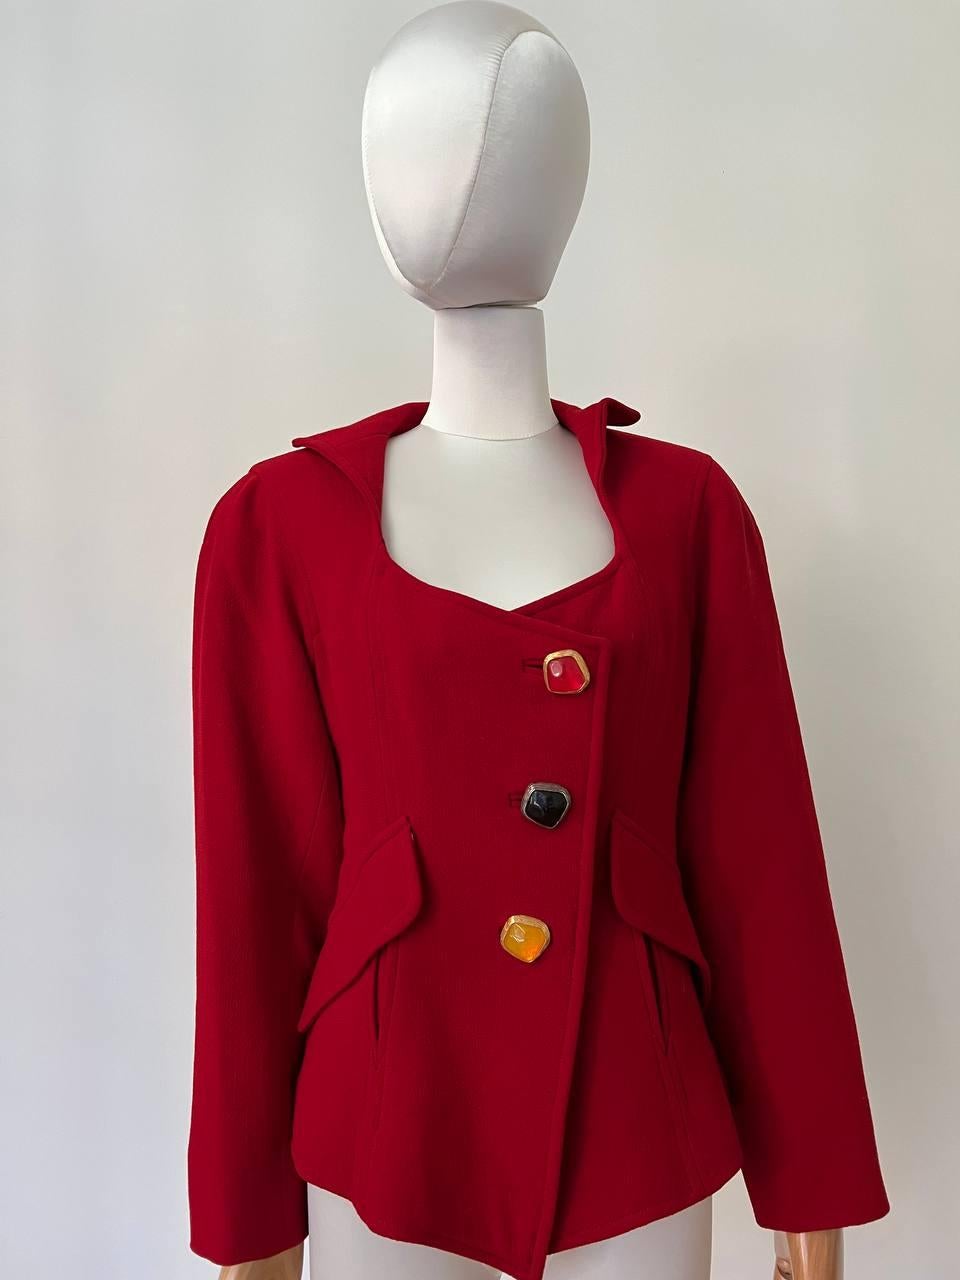 Vintage Christian Lacroix Red Accented Button Wool Blazer, 1991 5